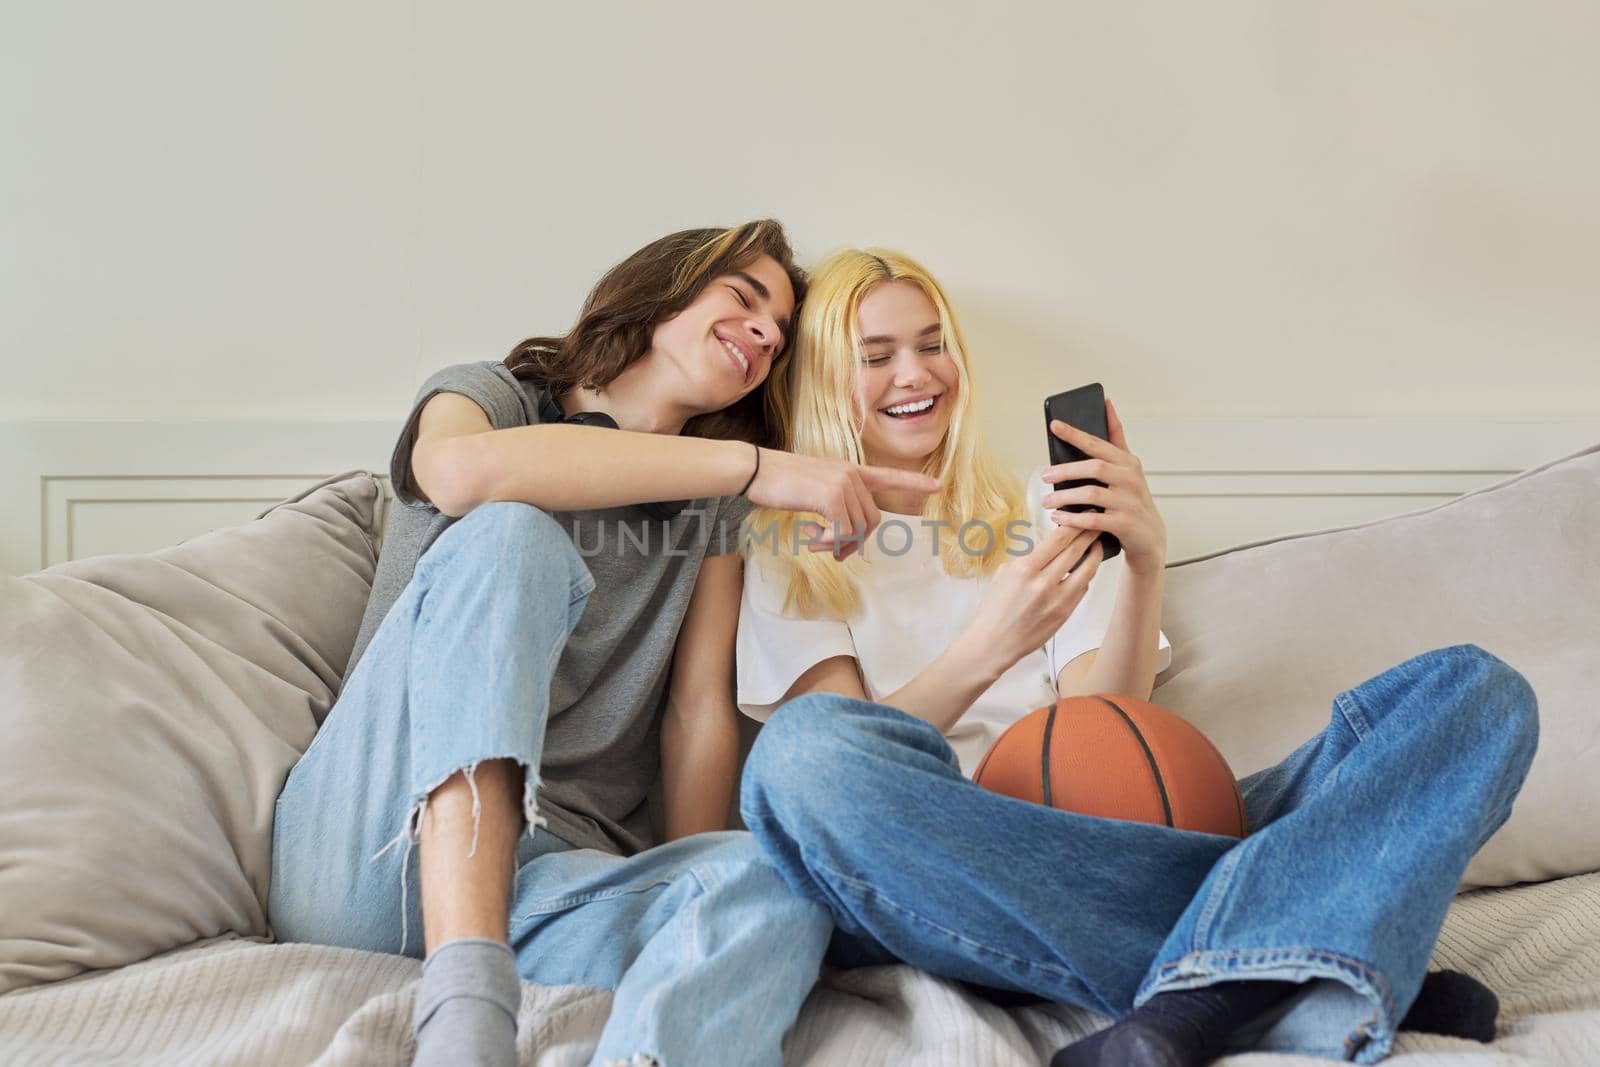 Happy laughing hipster teenagers male and female having fun using smartphone together. Couple takes photos chat online using video call. Lifestyle, technology, friendship, communication of adolescents